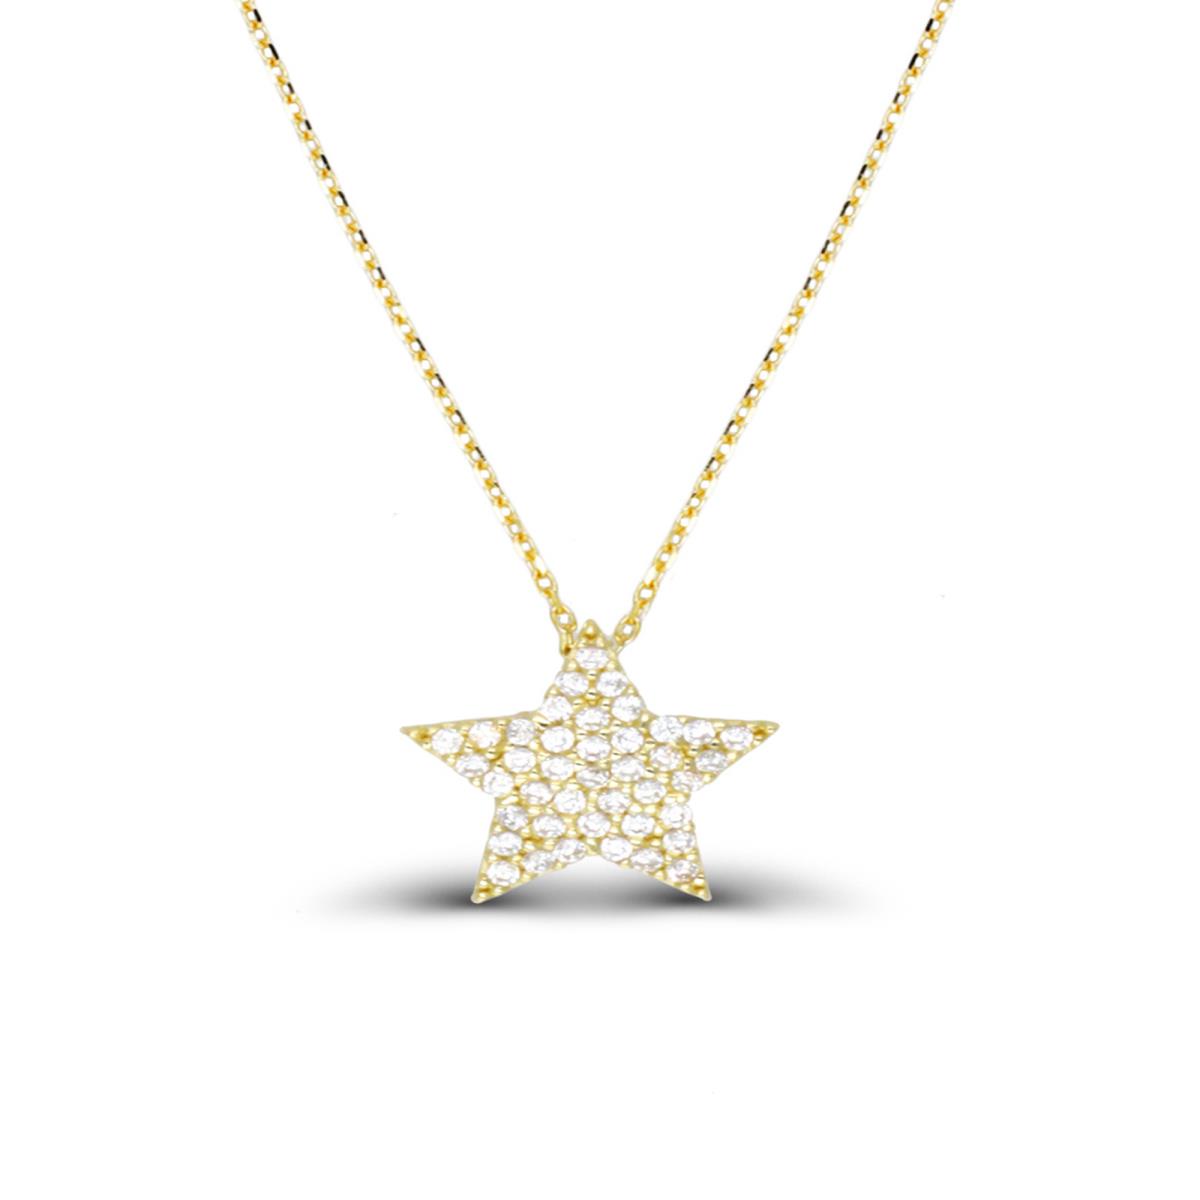 10K Yellow Gold Pave Star 16"+2" Necklace